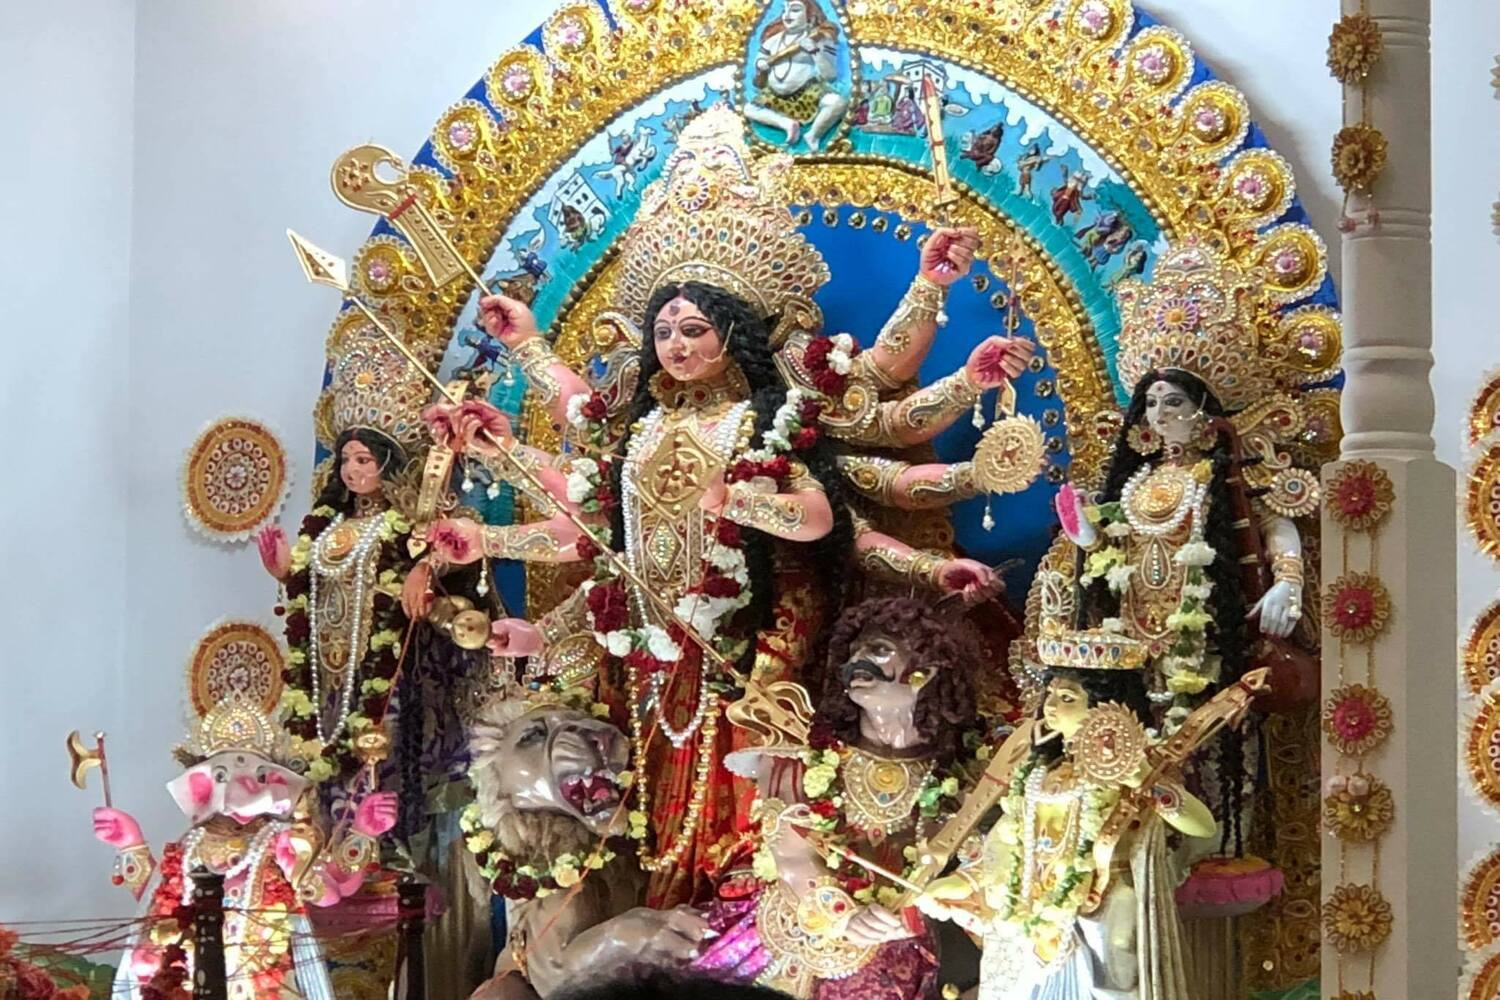 Durga Puja in New Jersey